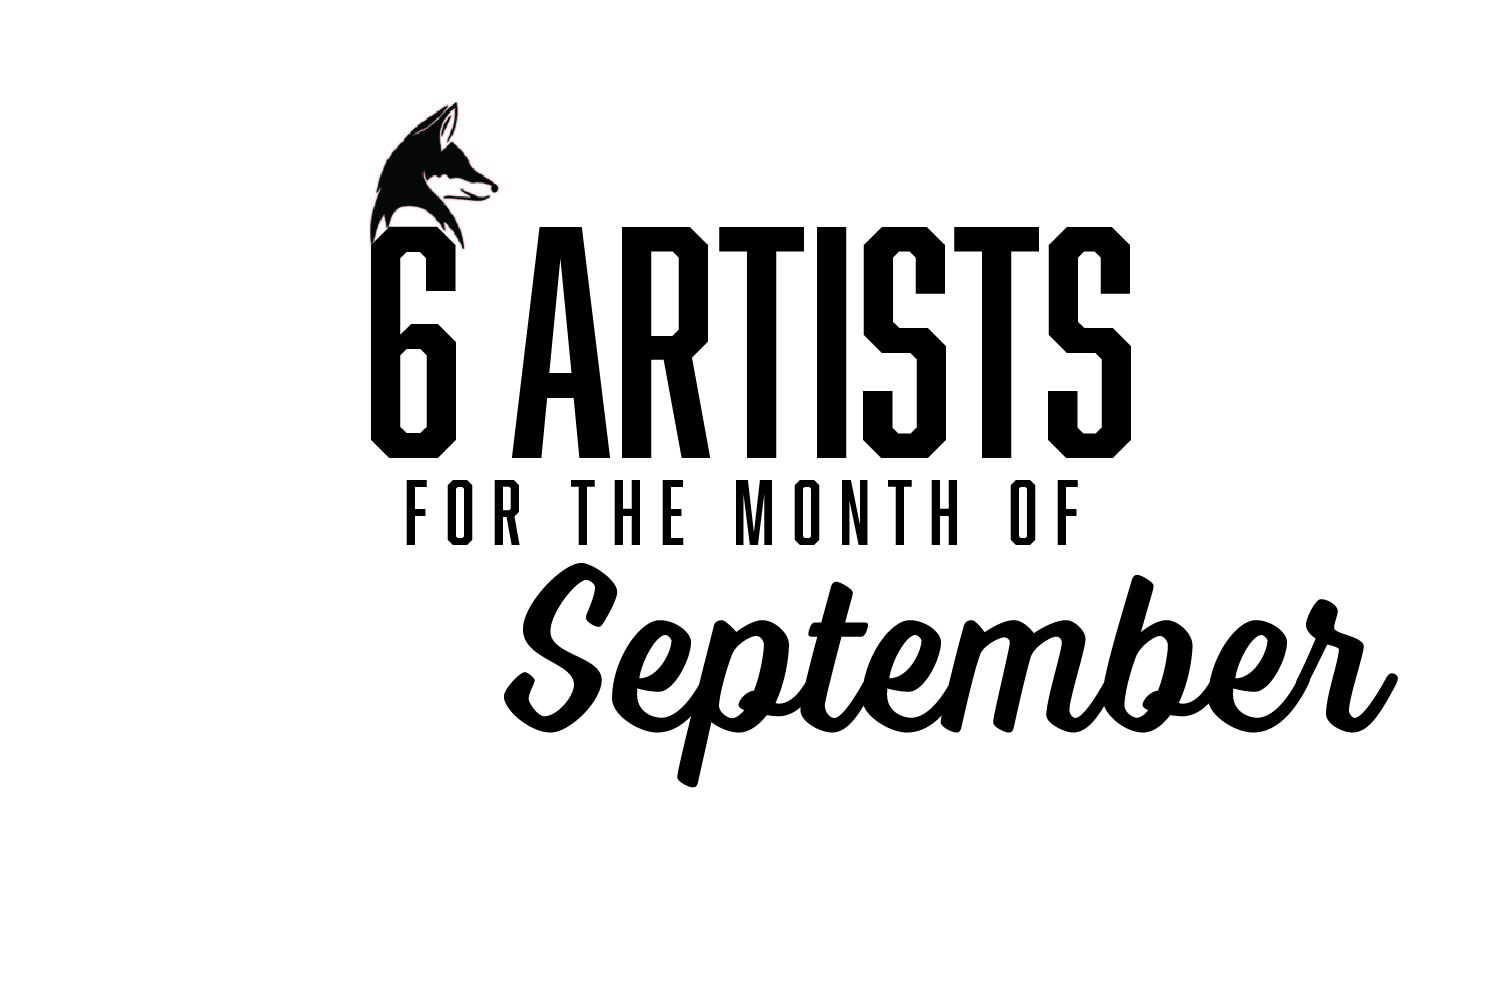 Six+Artists+You+Should+Be+Listening+To%3A+September+2020+EDITION